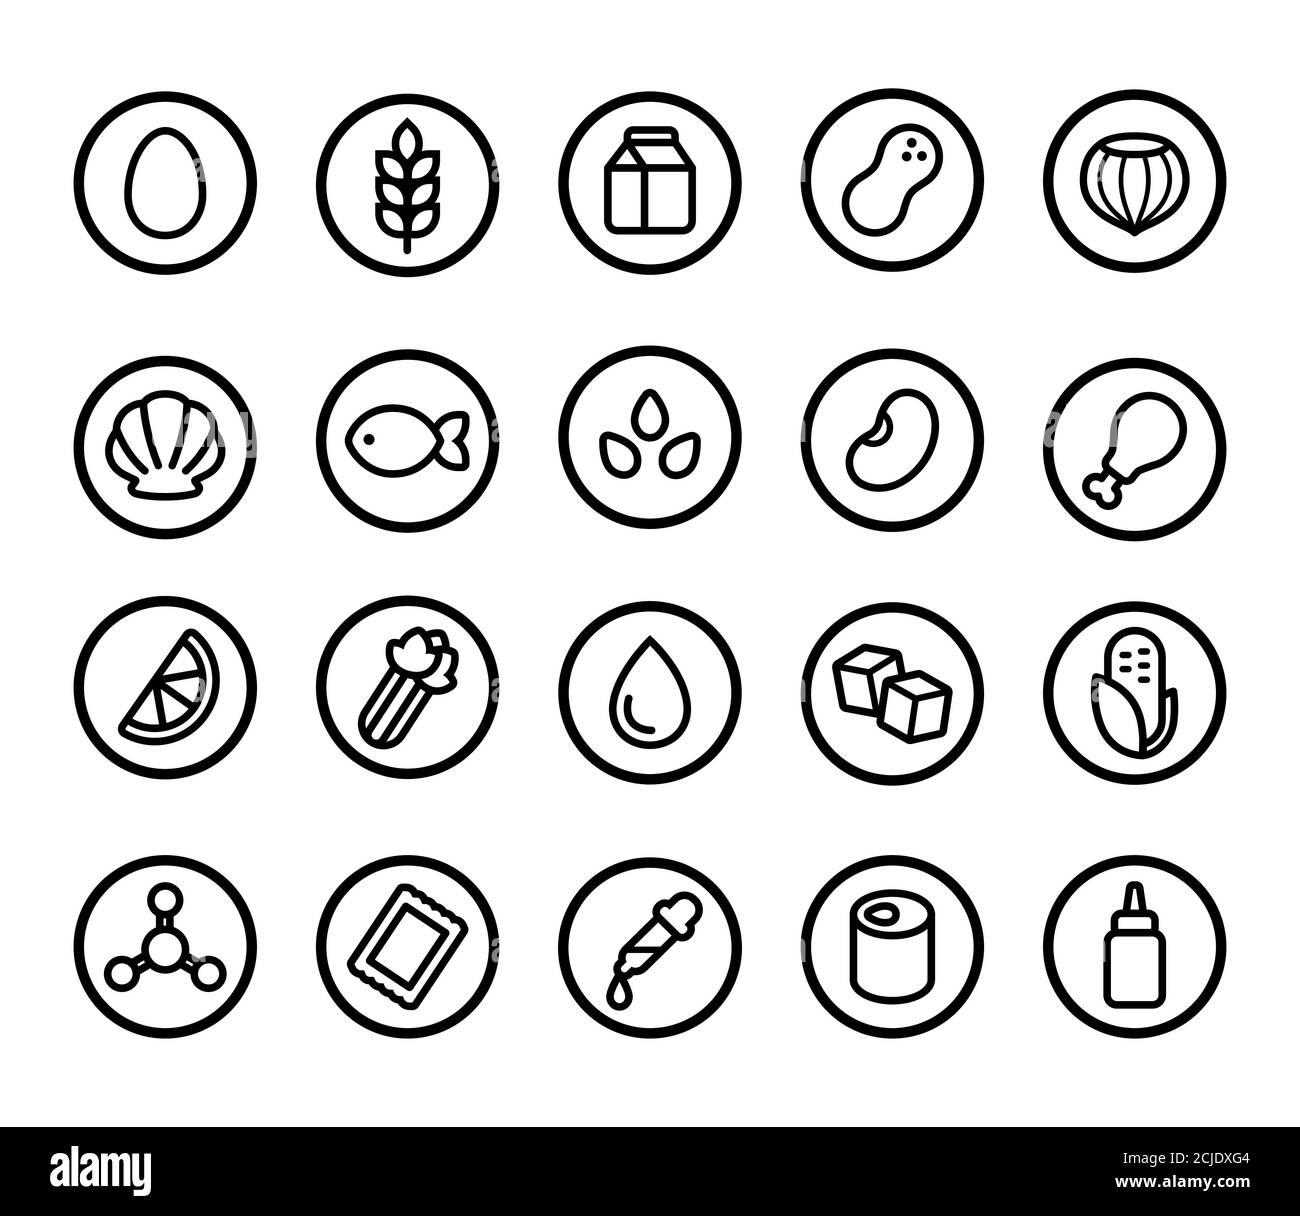 Set of allergy ingredient icons, common allergen warning. Gluten and nuts, eggs and dairy, artificial sweeteners and preservatives, and more. Simple l Stock Vector